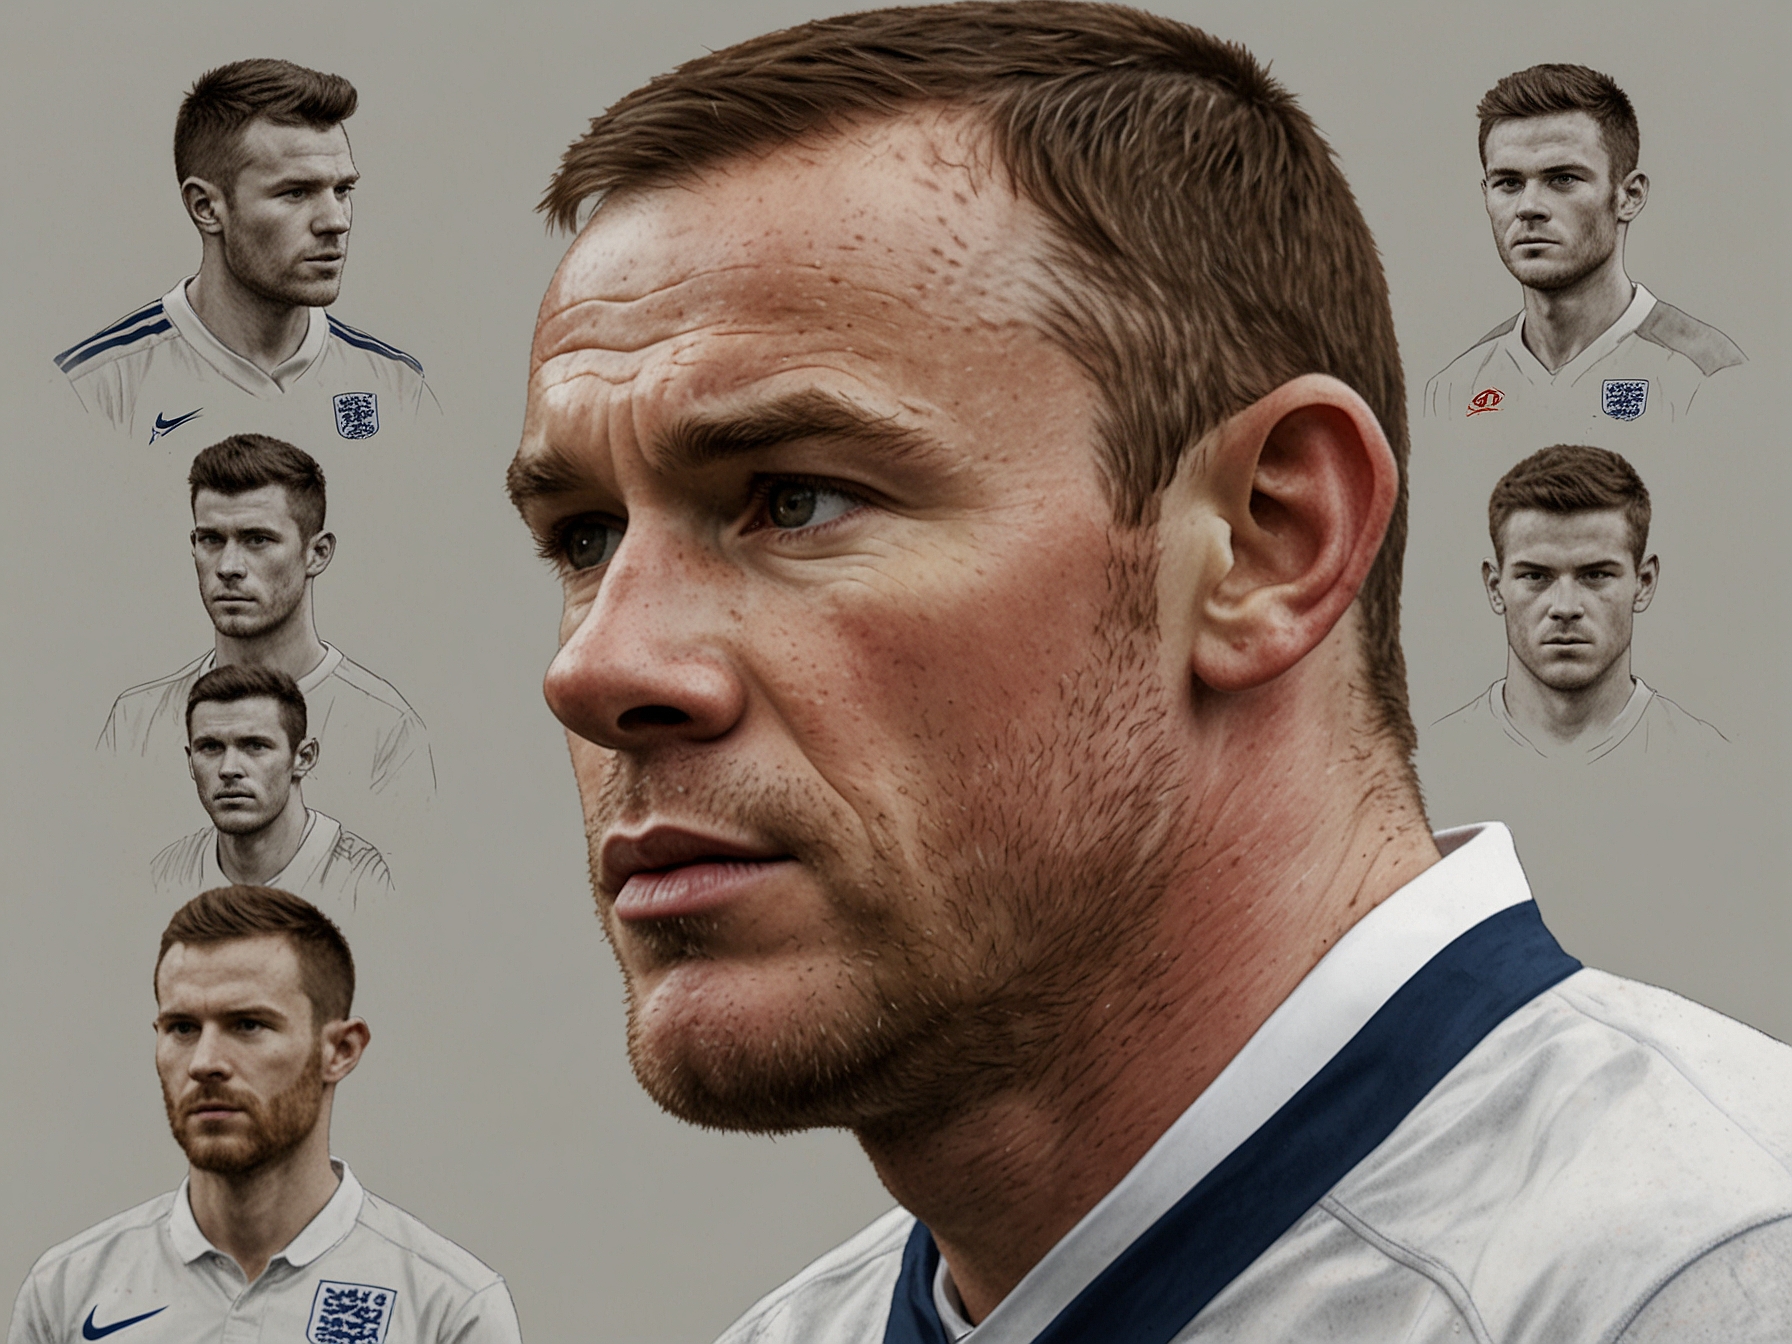 Wayne Rooney, England's all-time top scorer, provides his insights on the ideal starting XI for the crucial match against Slovenia. His selections combine experience and youth to form a balanced team.